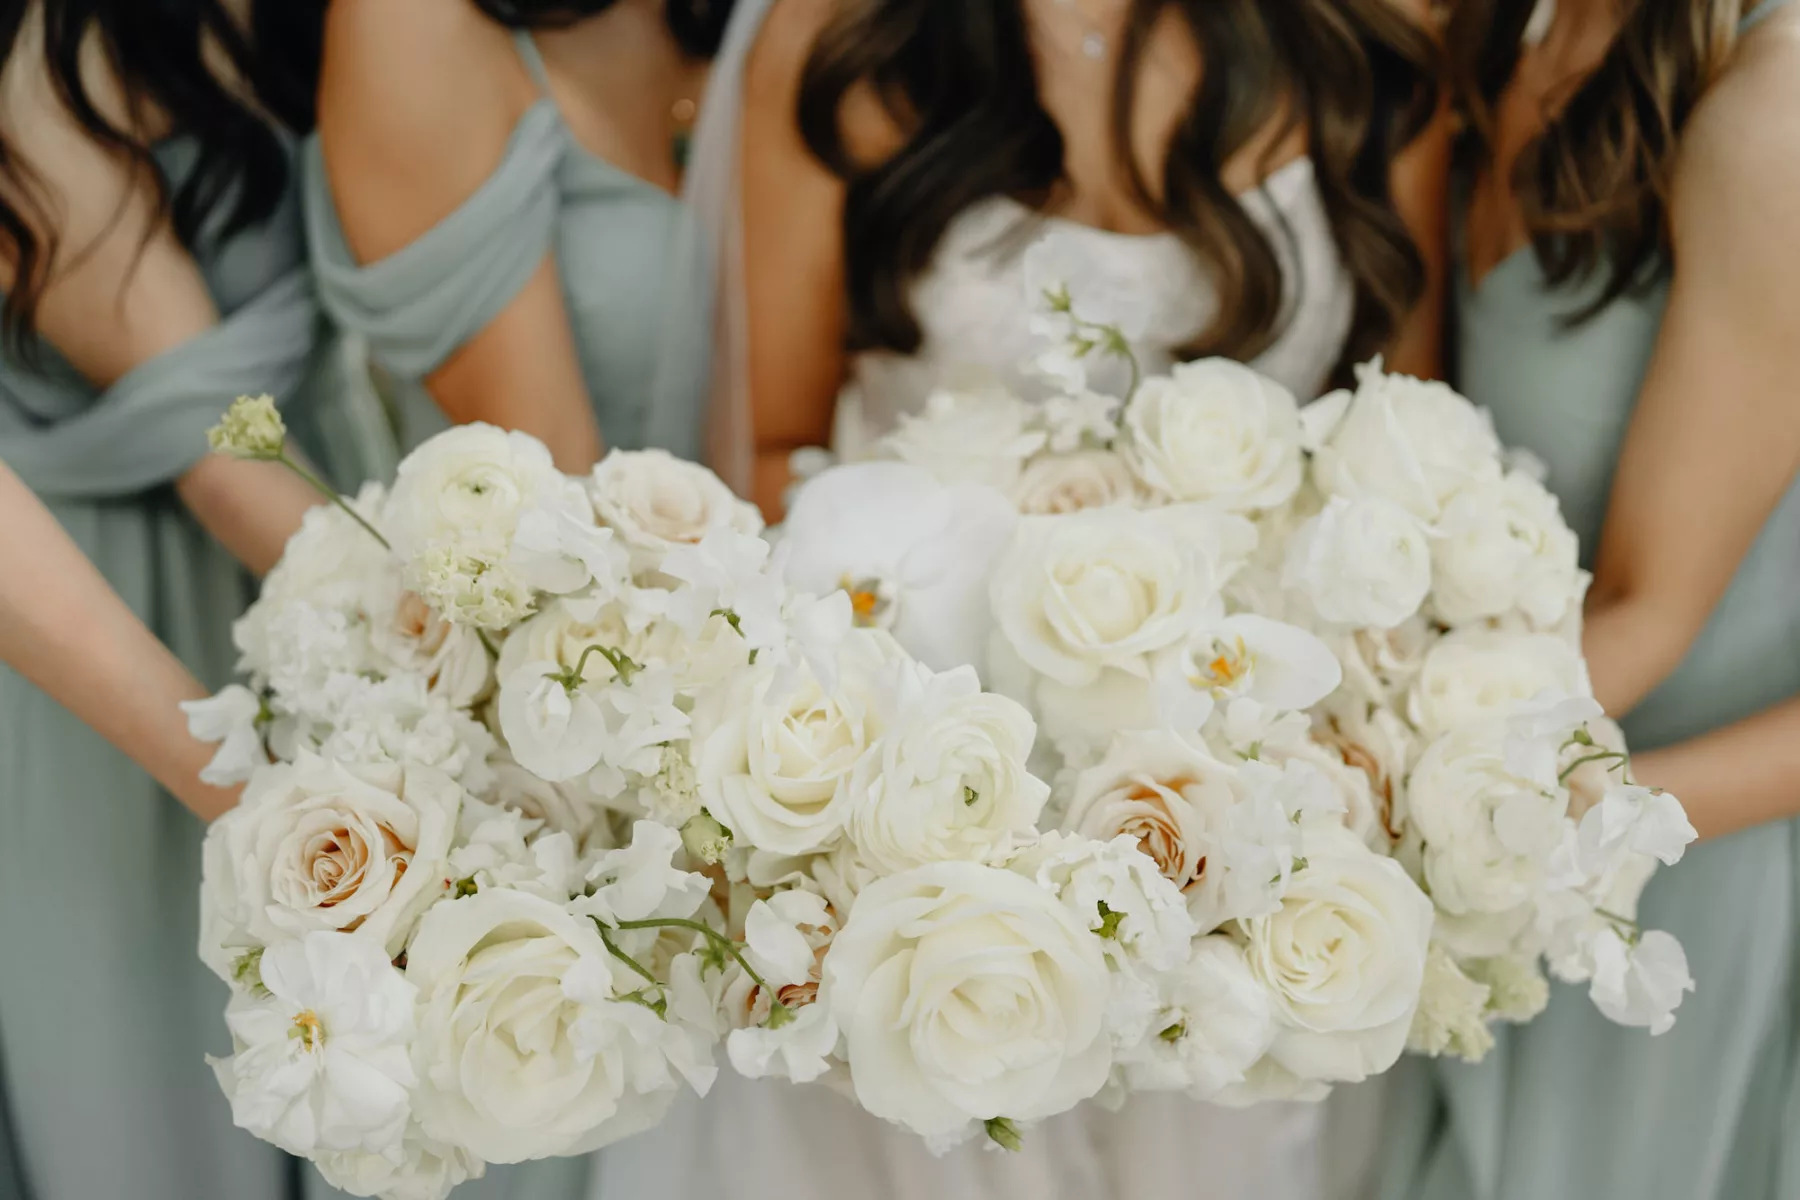 White Monochromatic Wedding Bouquet Ideas | Roses, Lilly of the Valley, and Orchid Flower Arrangement Inspiration | Tampa Bay Florist Bloom Shakalaka